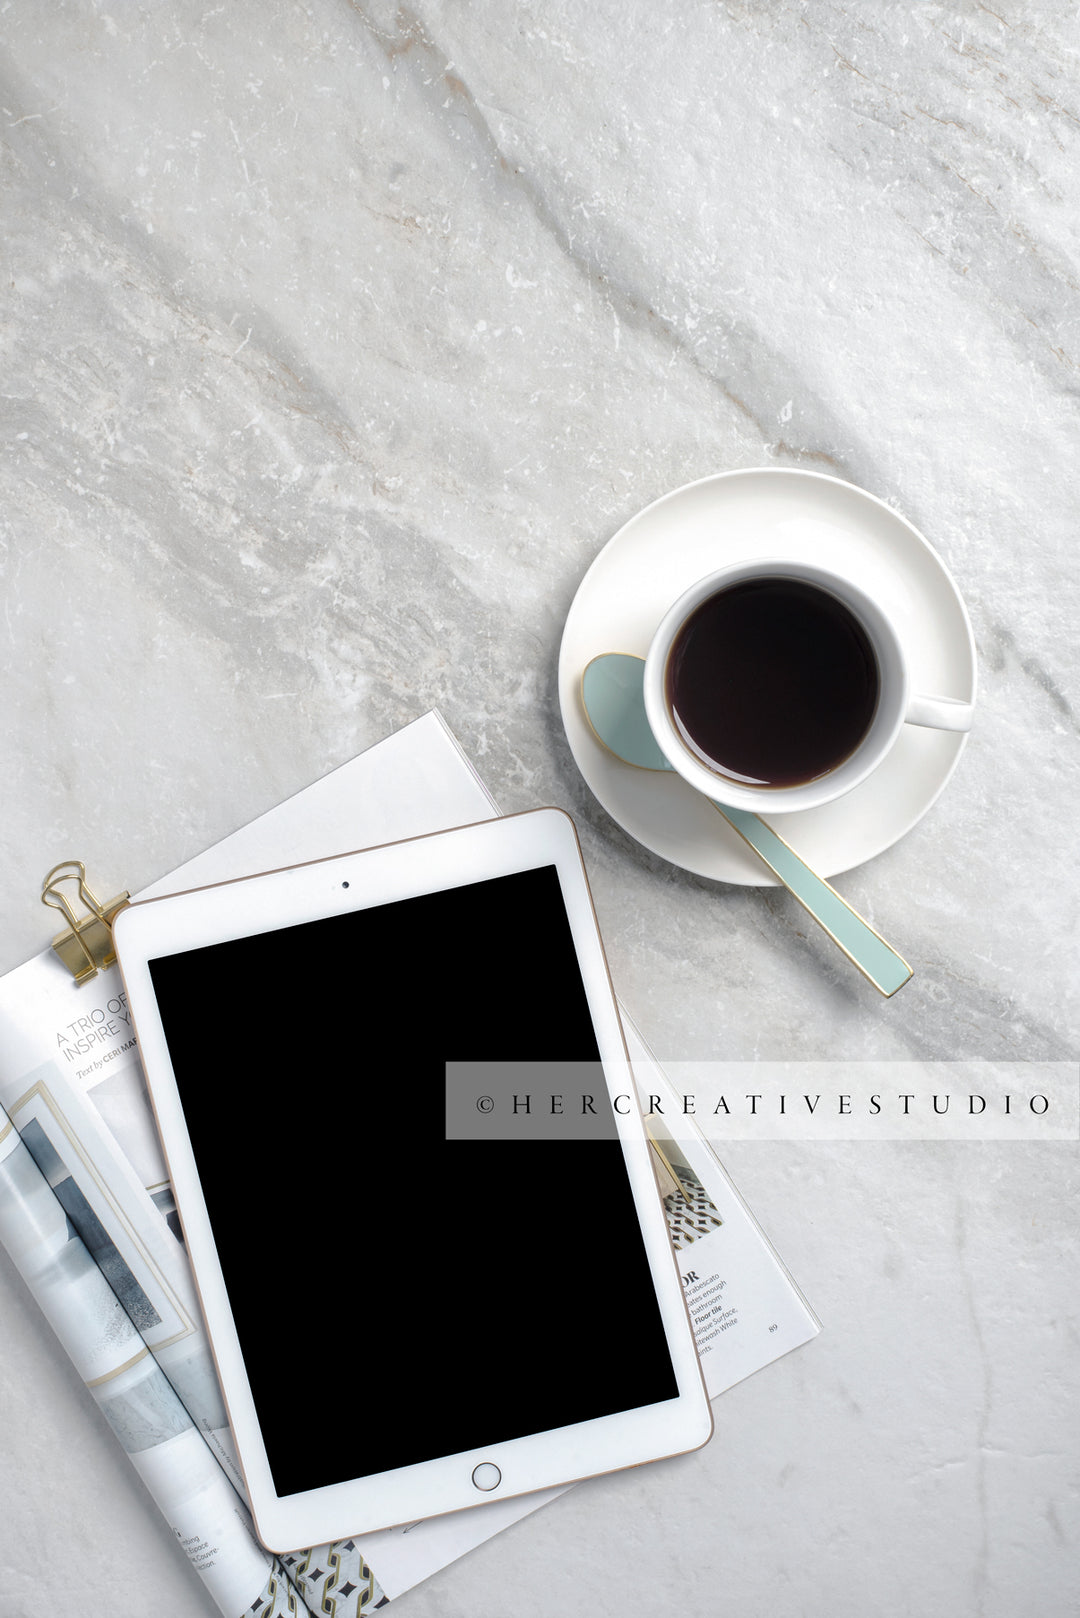 Tablet and Coffee on Marble Background